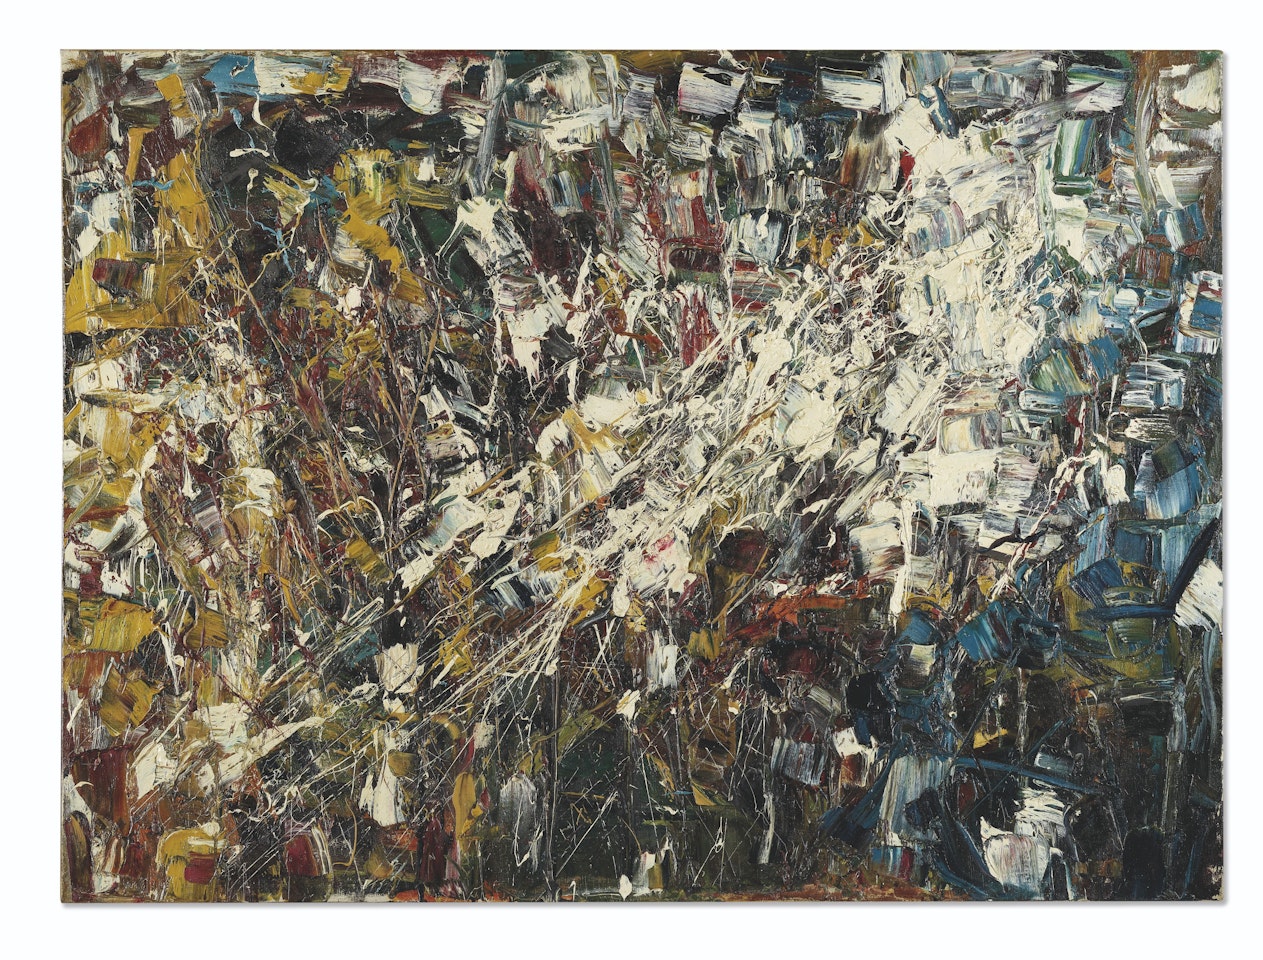 Composition by Jean-Paul Riopelle